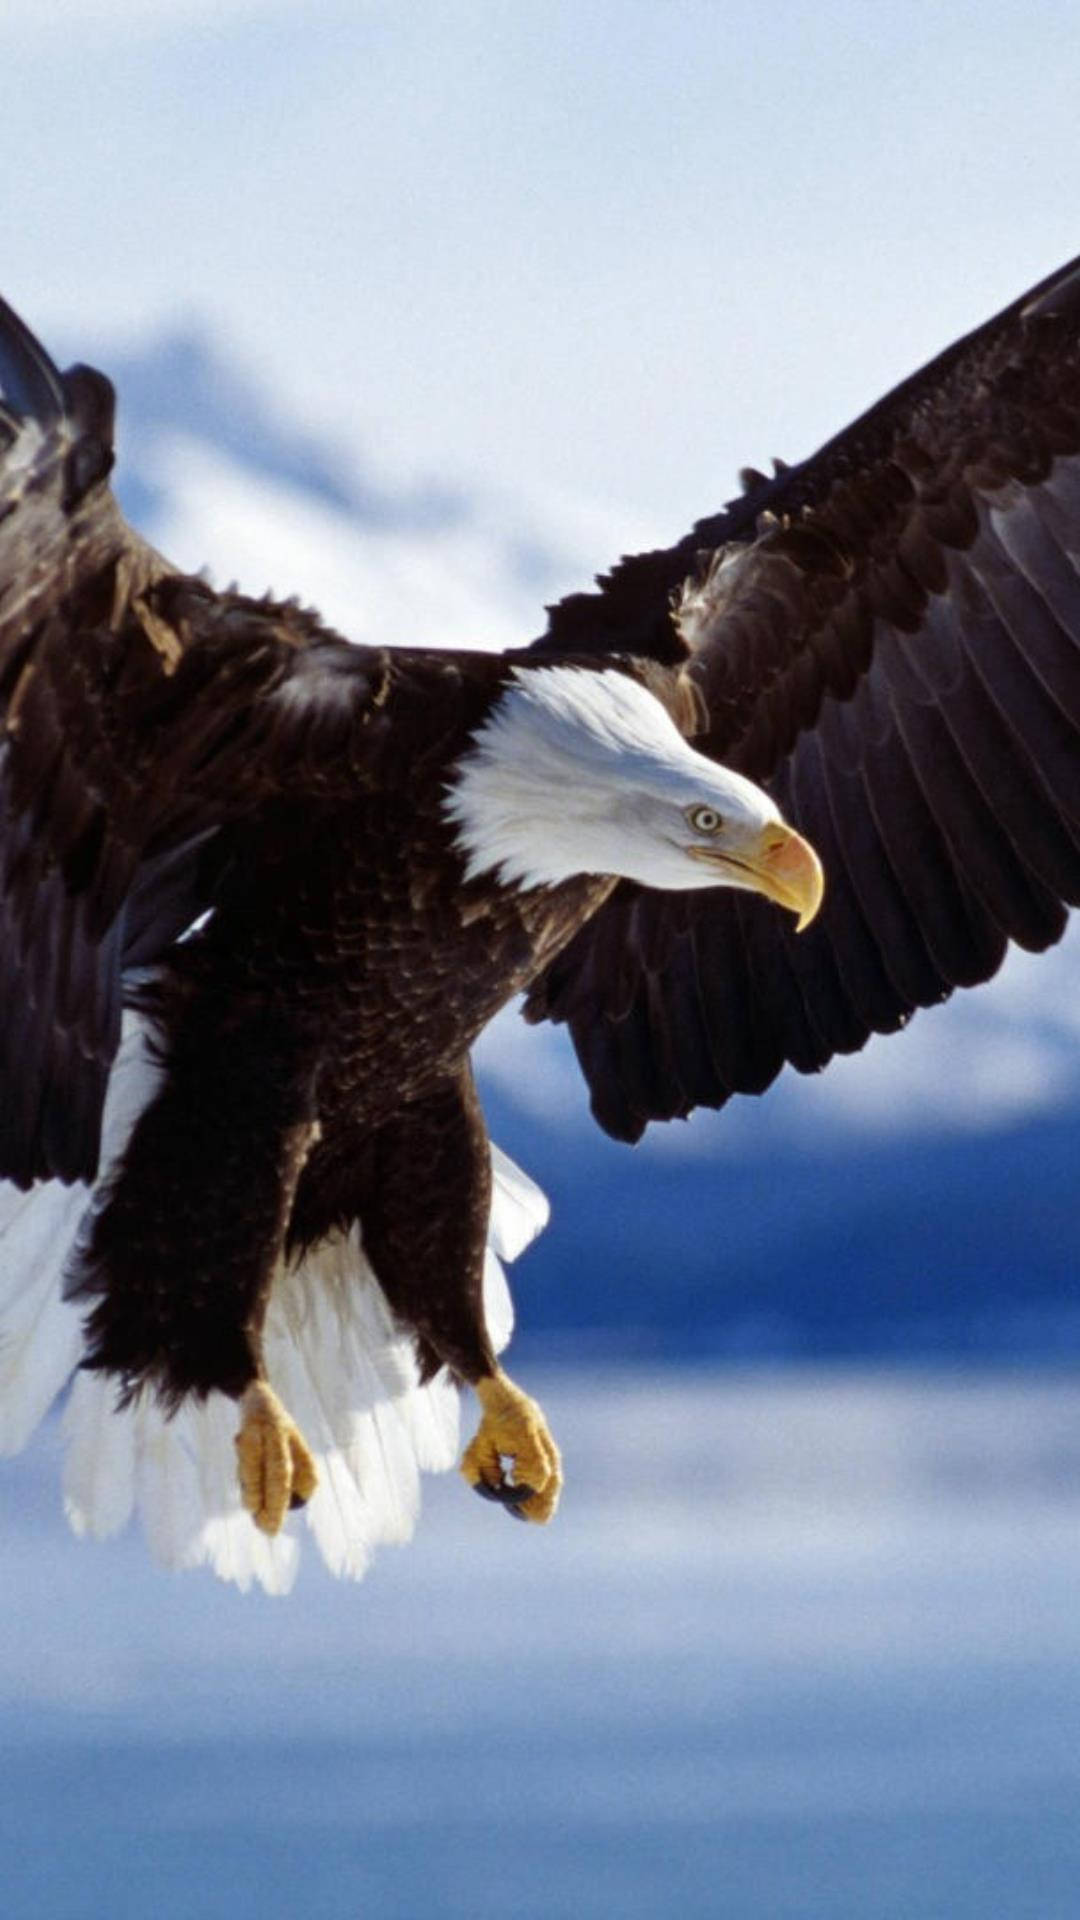 America Iphone With A Soaring Eagle Wallpaper